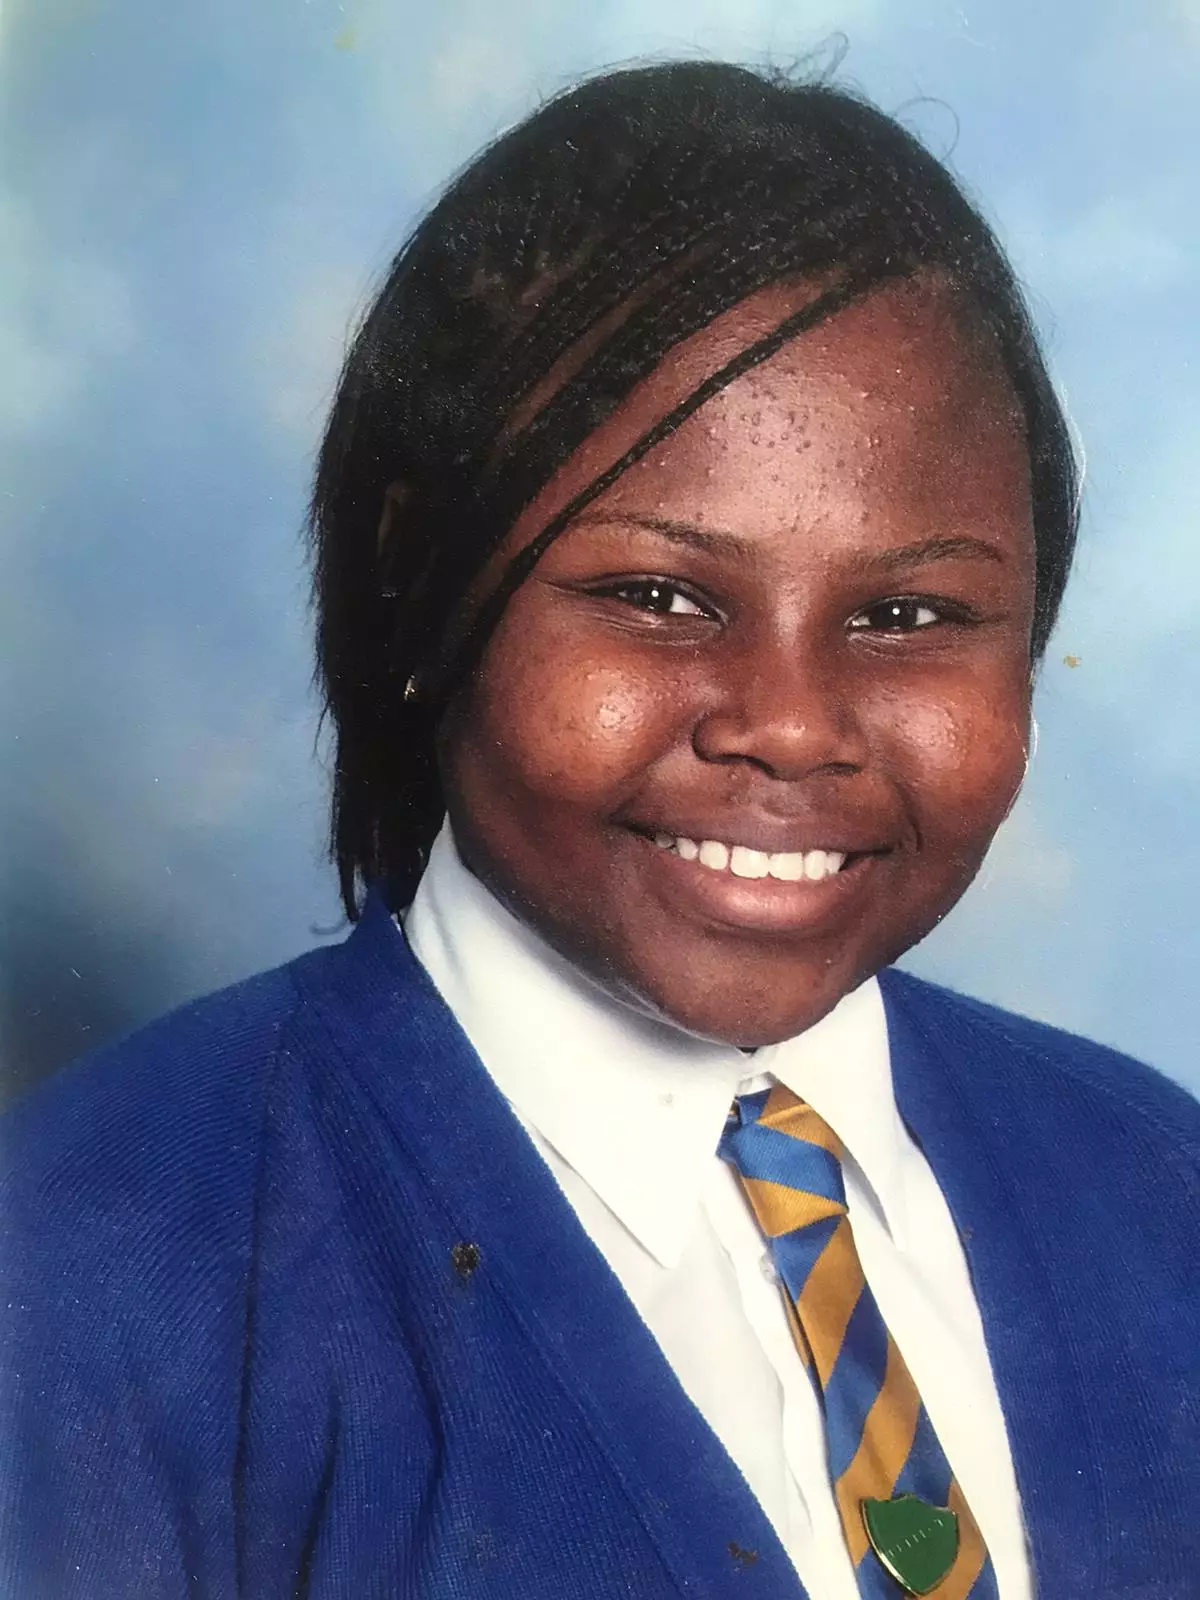 Nikki in Year 6 wearing her natural hair in braids. Growing up she was desperate for her curls to be 'straight and slick' (